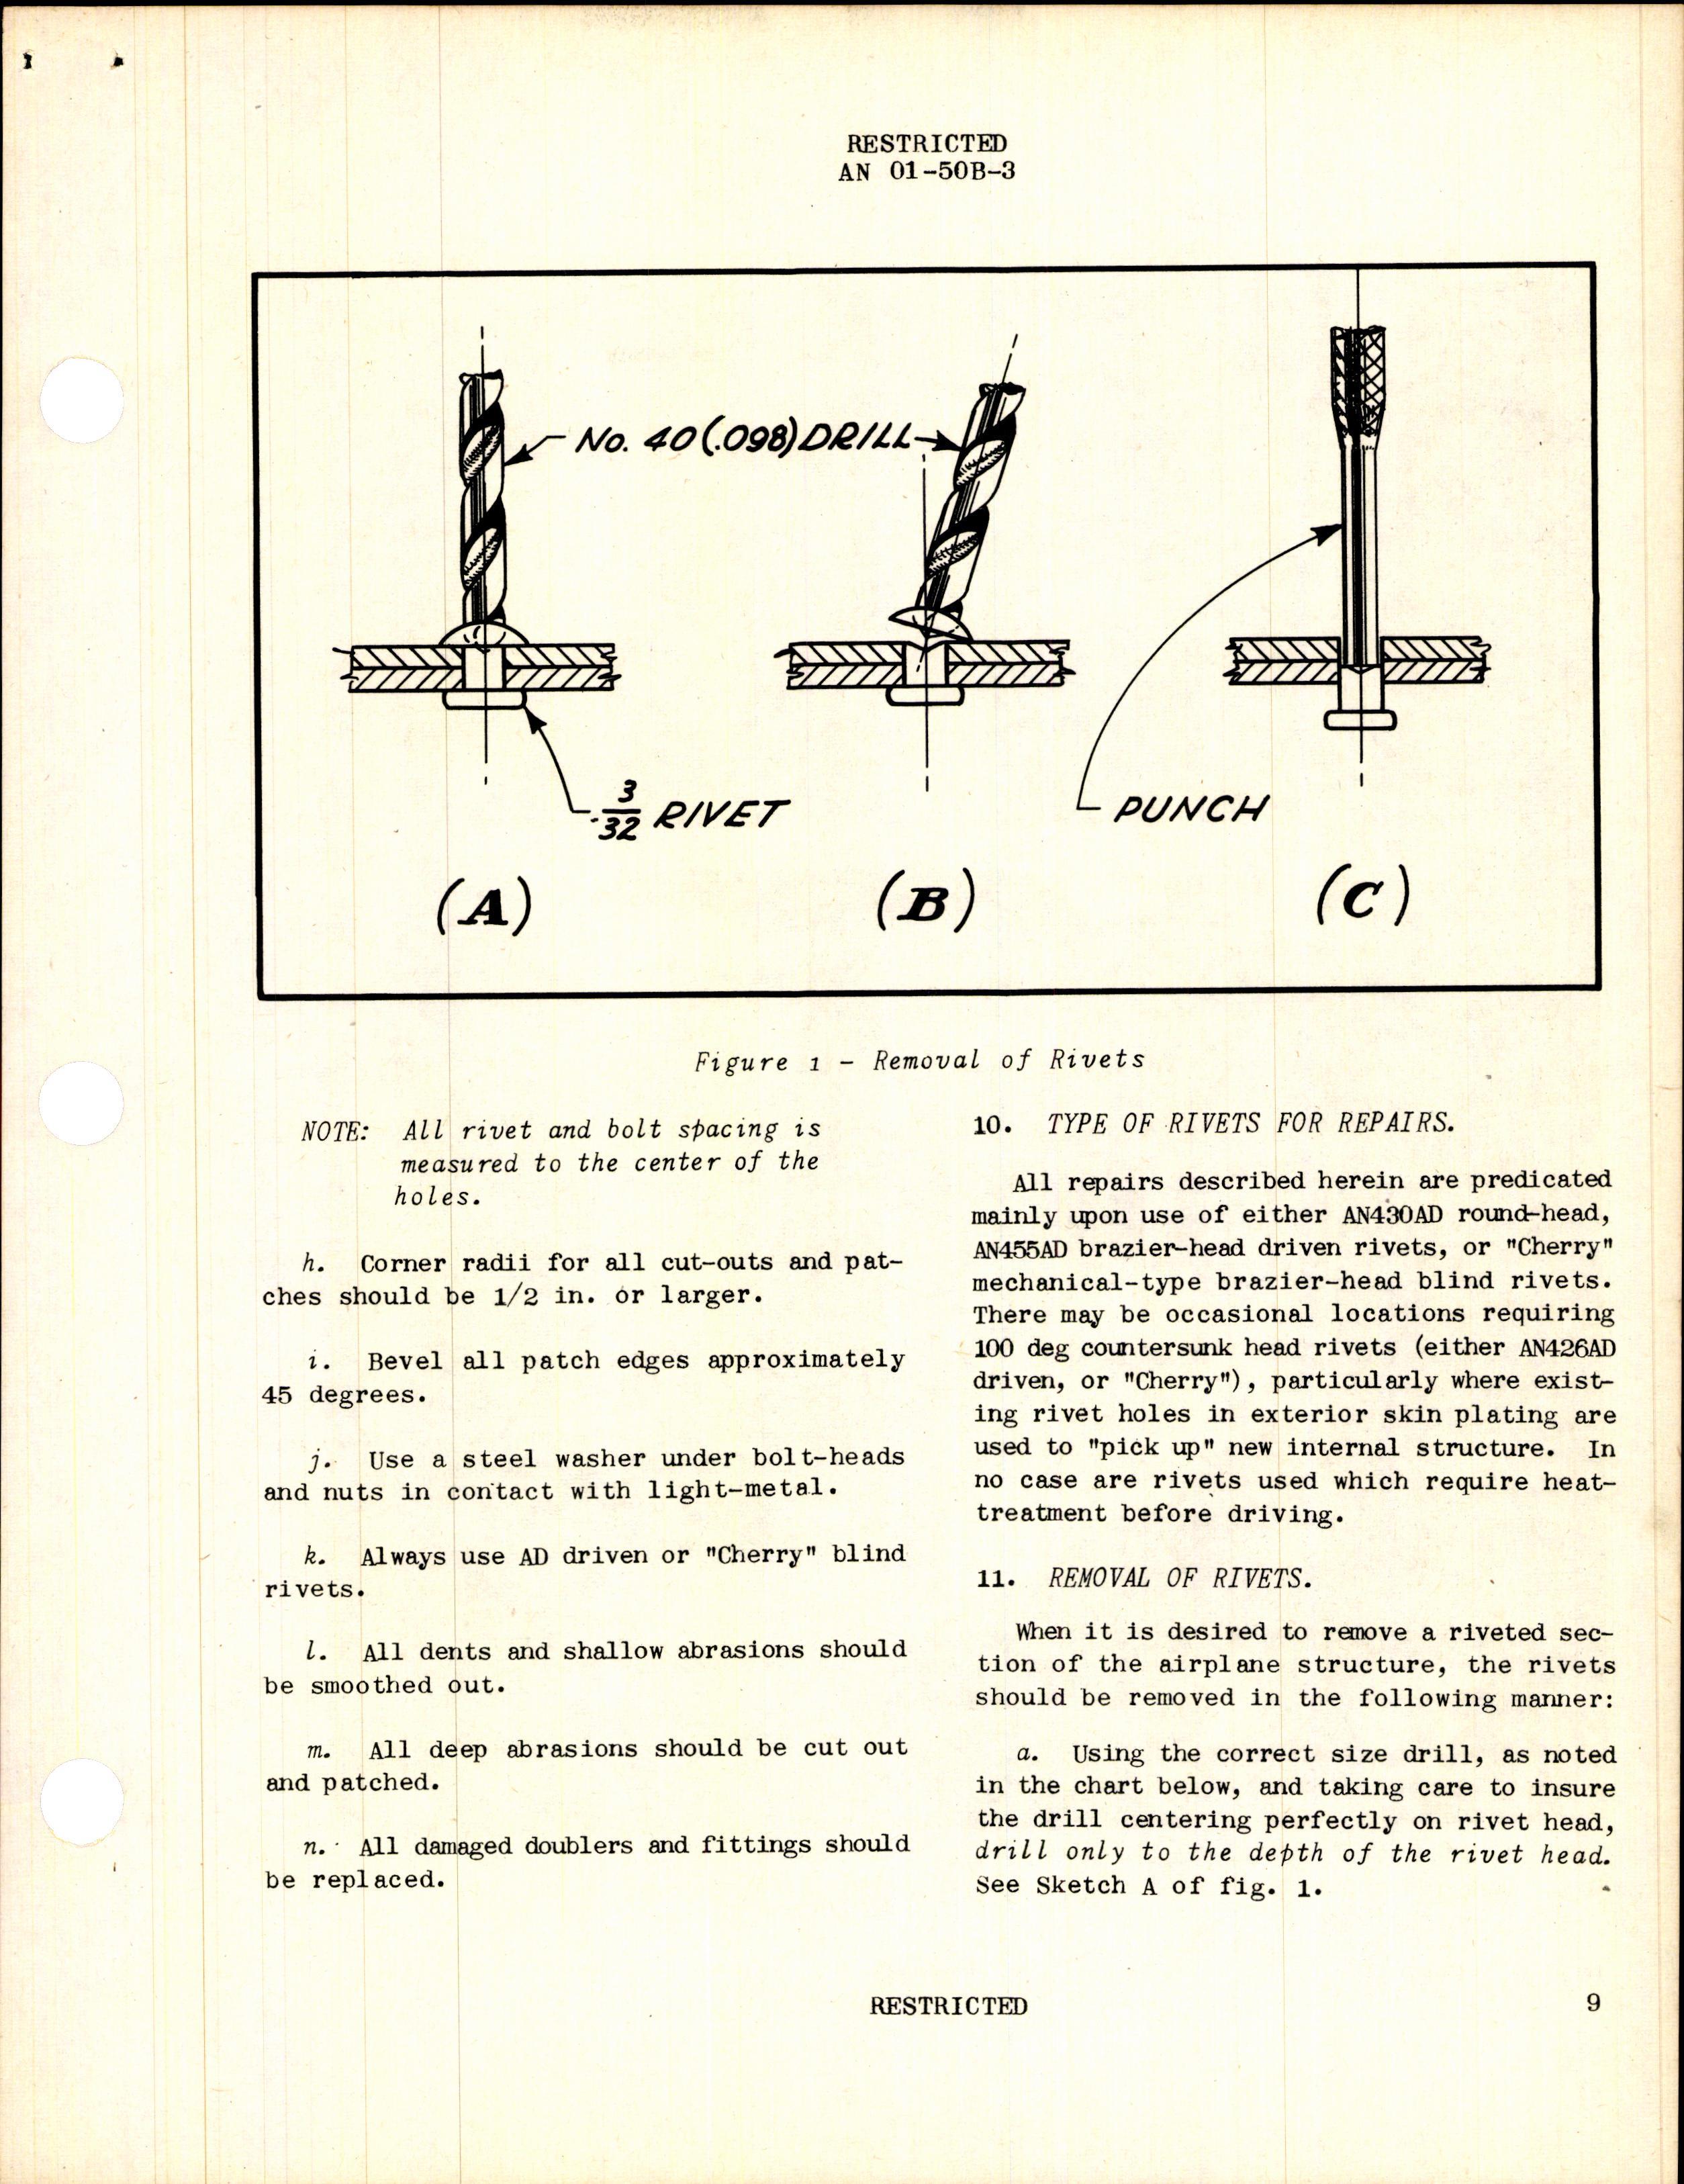 Sample page 13 from AirCorps Library document: Structural Repair Instructions for BT-13A, BT-15 and SNV-1